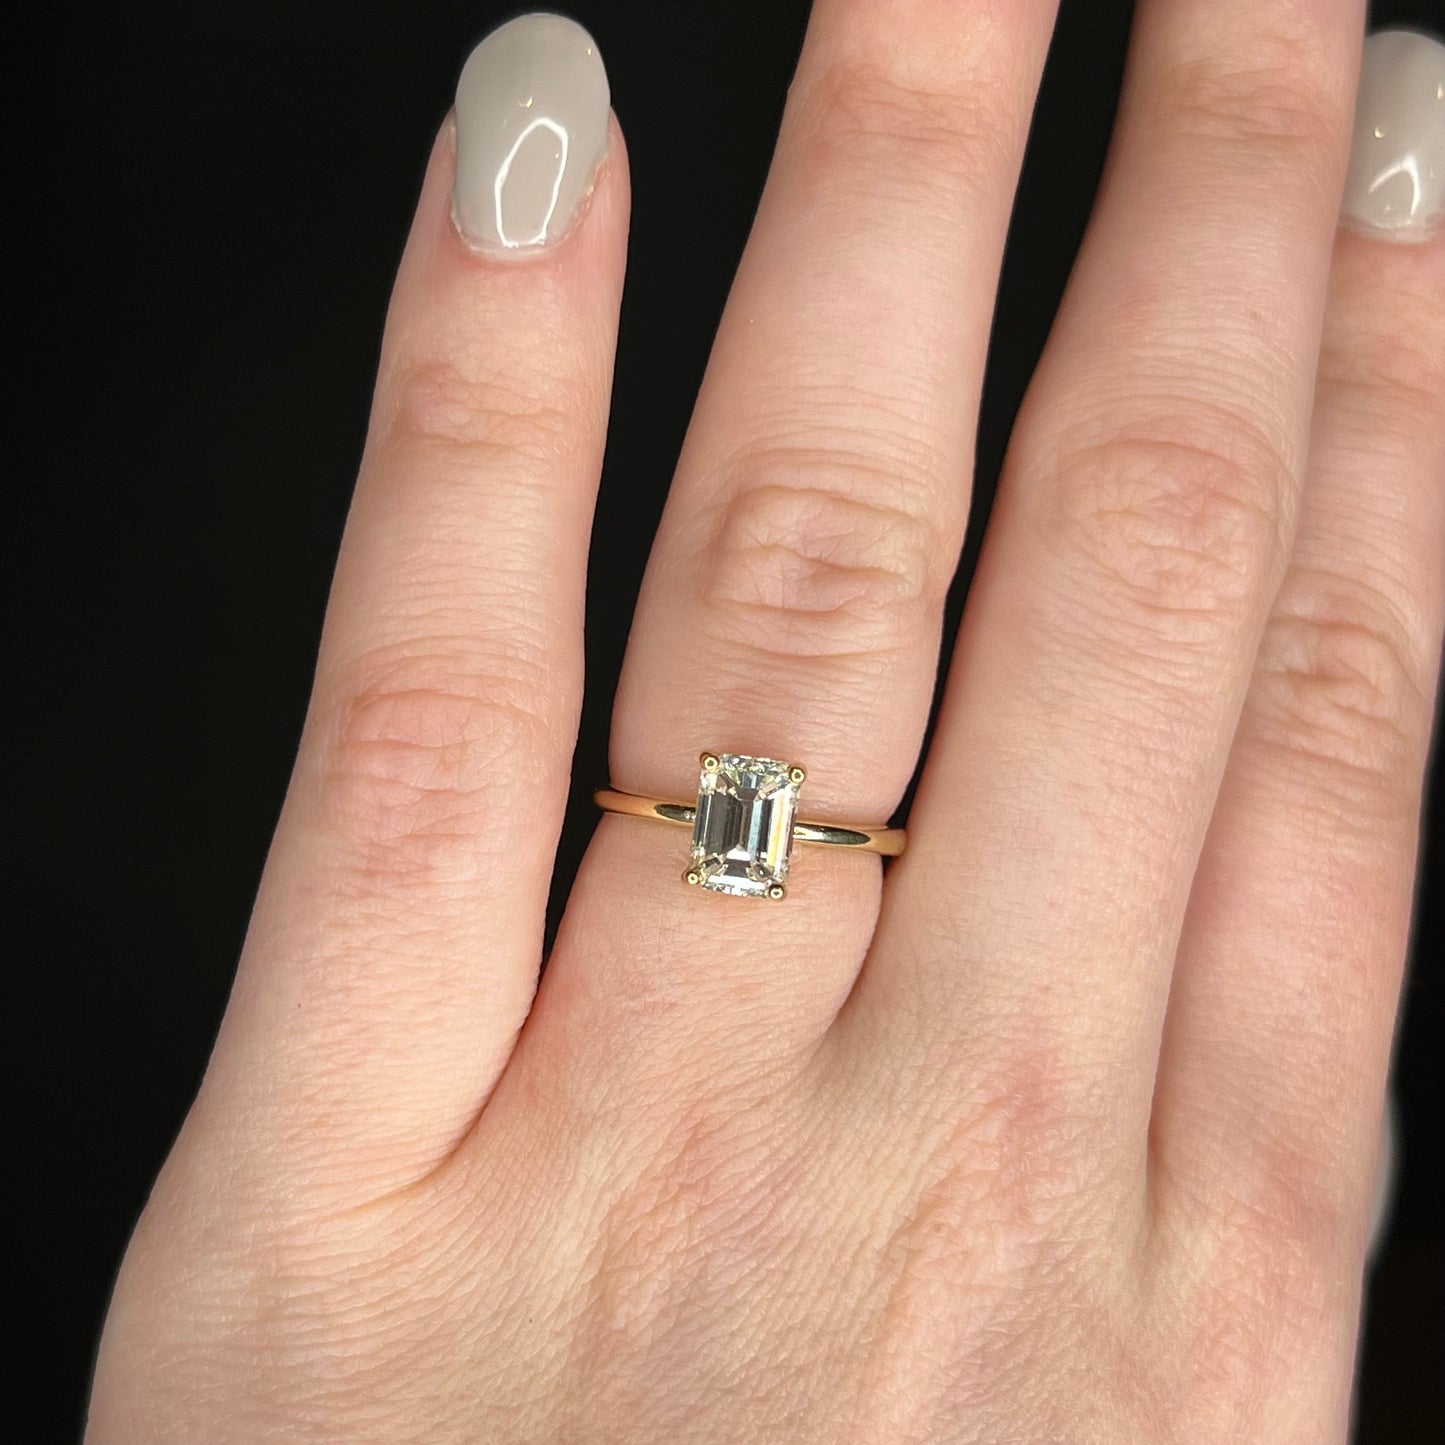 2.03 GIA Emerald Cut Diamond Engagement Ring in 14k Yellow Gold